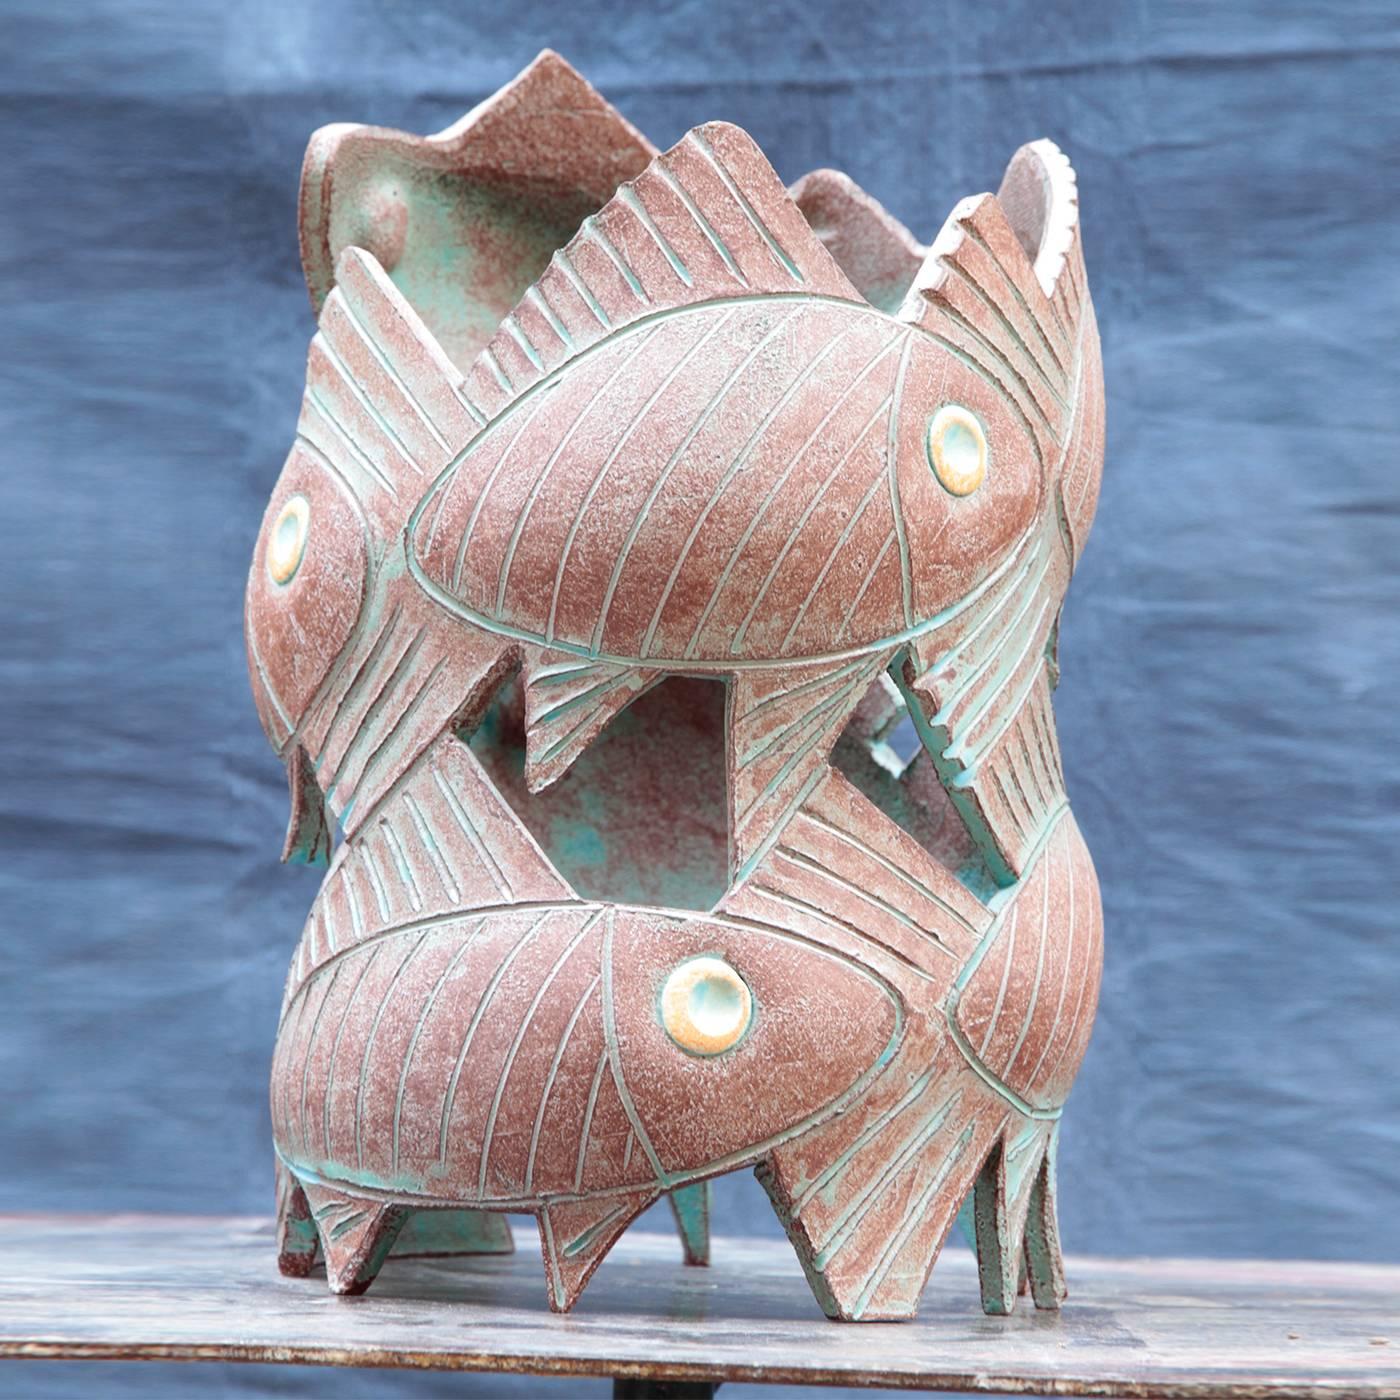 This exquisite ceramic sculpture is crafted using the technique called "a lastra", where the terracotta is initially molded around a temporary support. The piece is then cooked at 2190 degrees Fahrenheit and finished with cinder-based